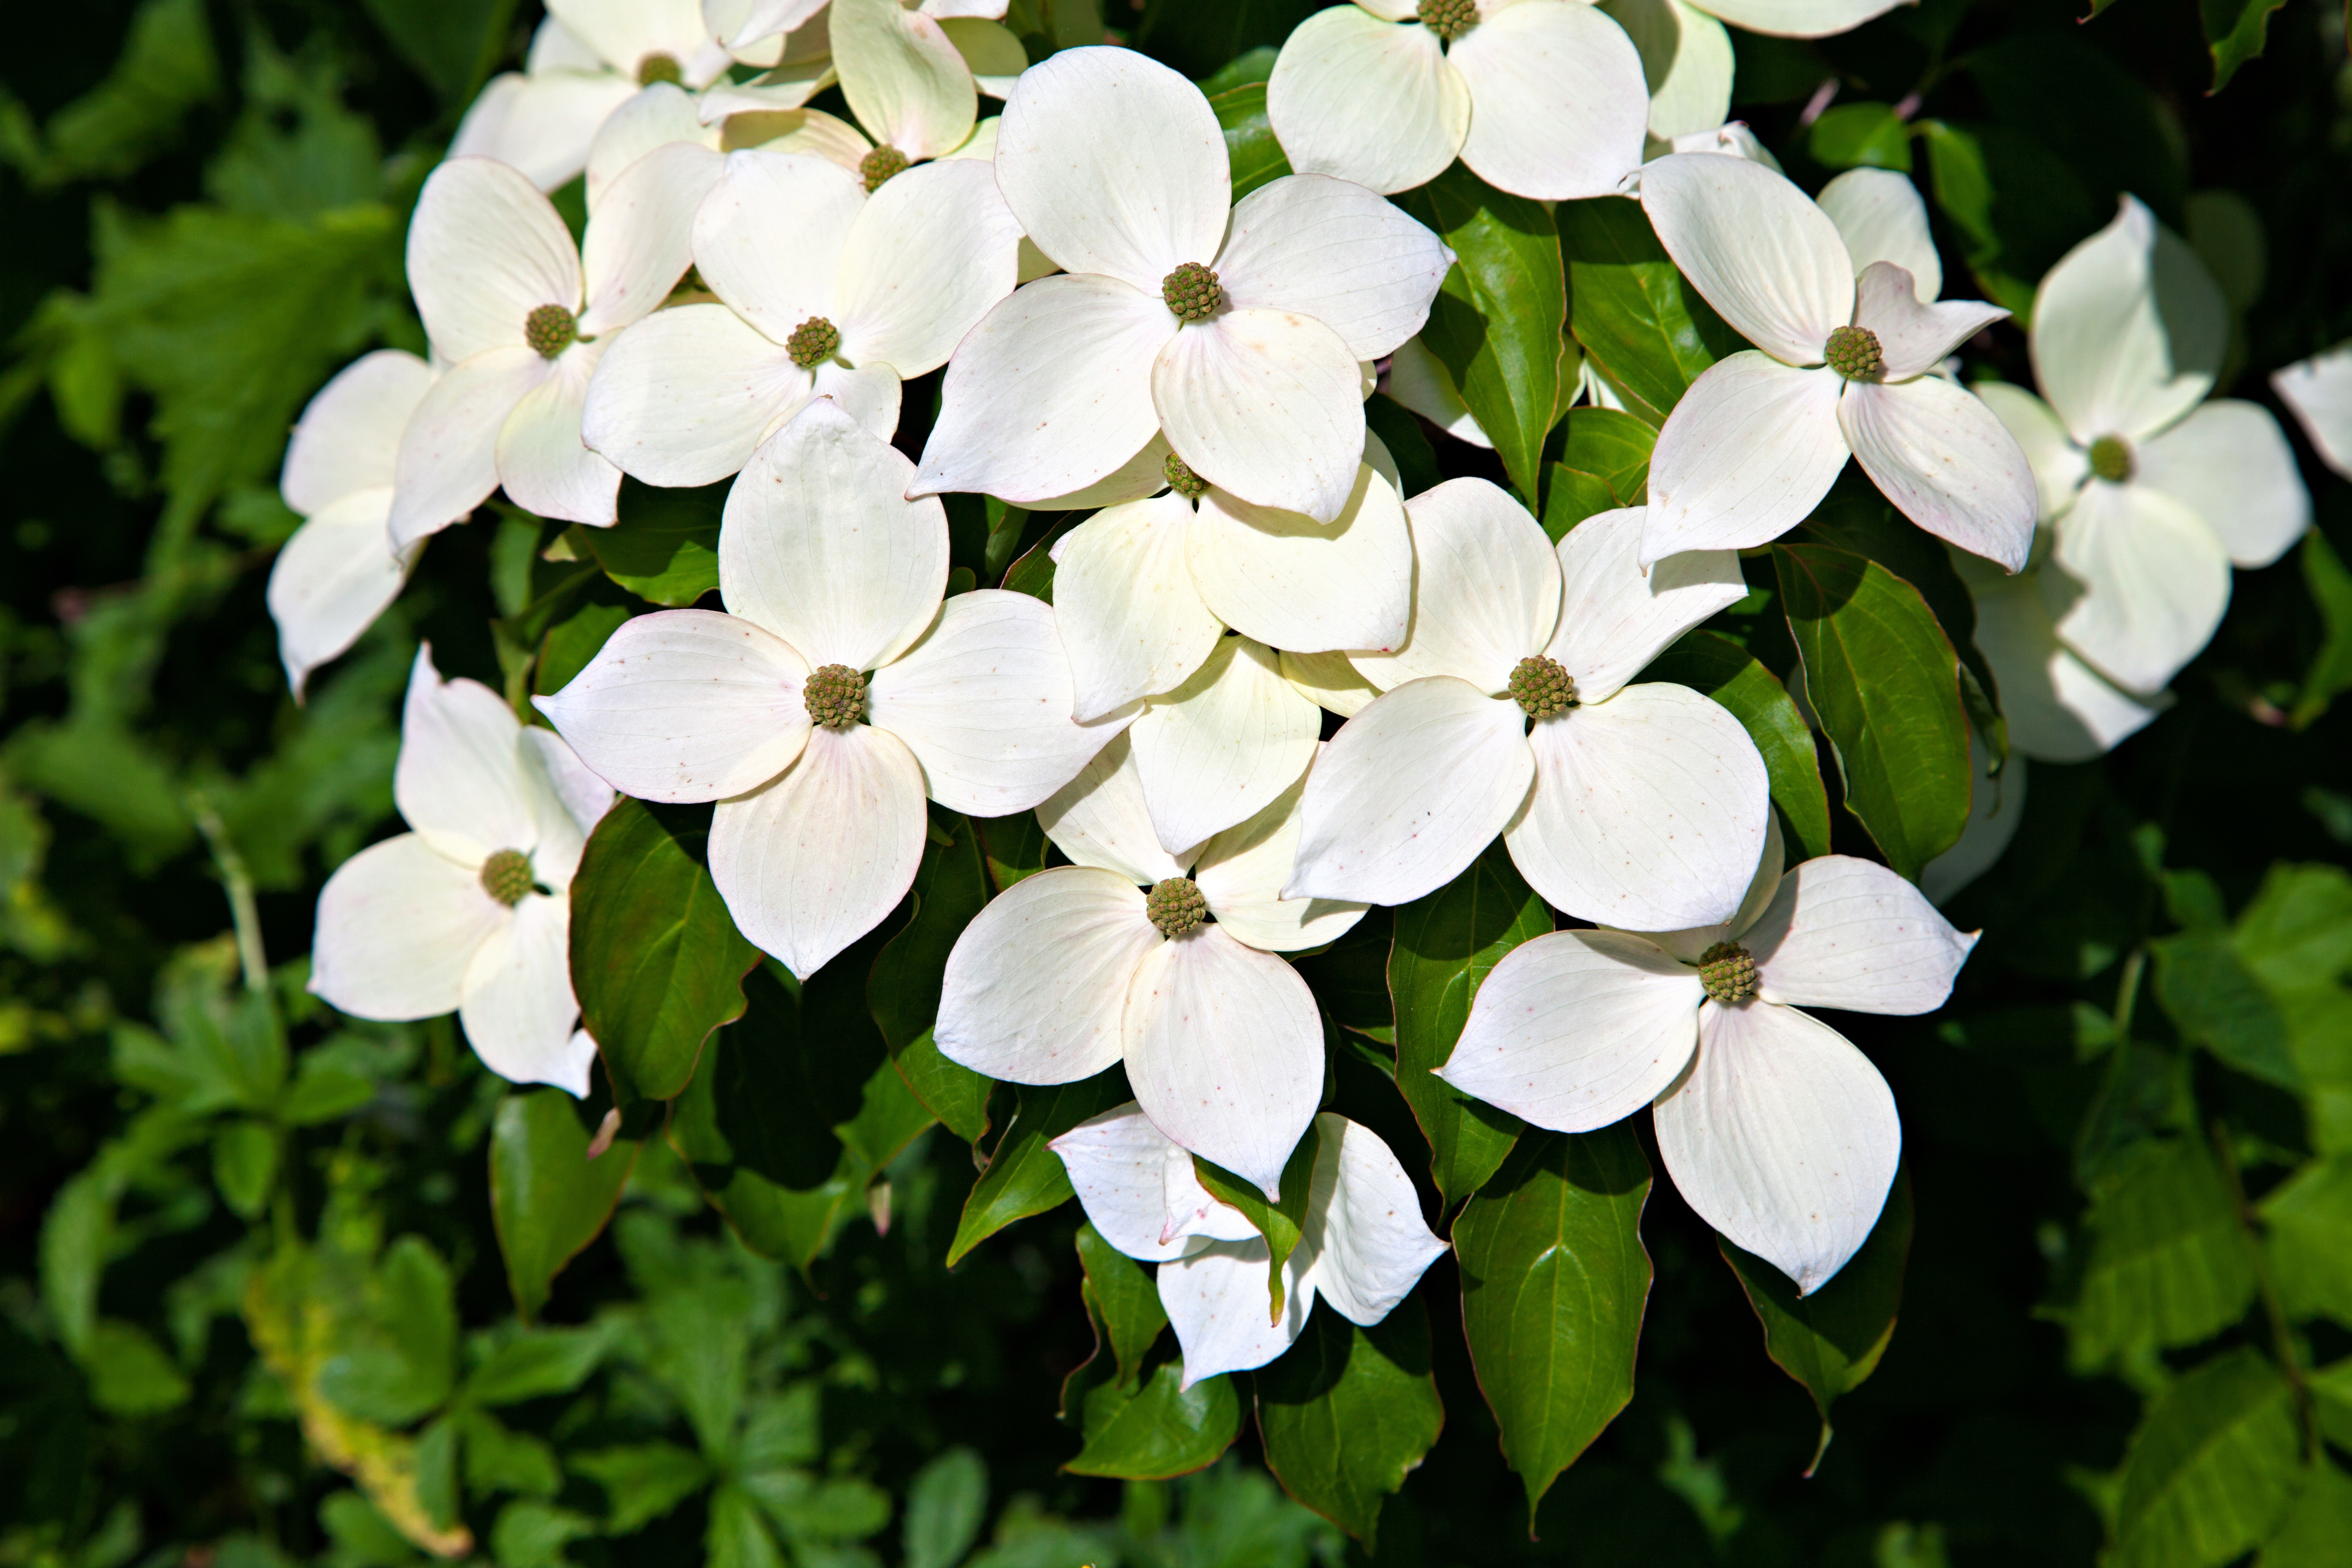 Cornus kousa flowers is widely cultivated as an ornamental